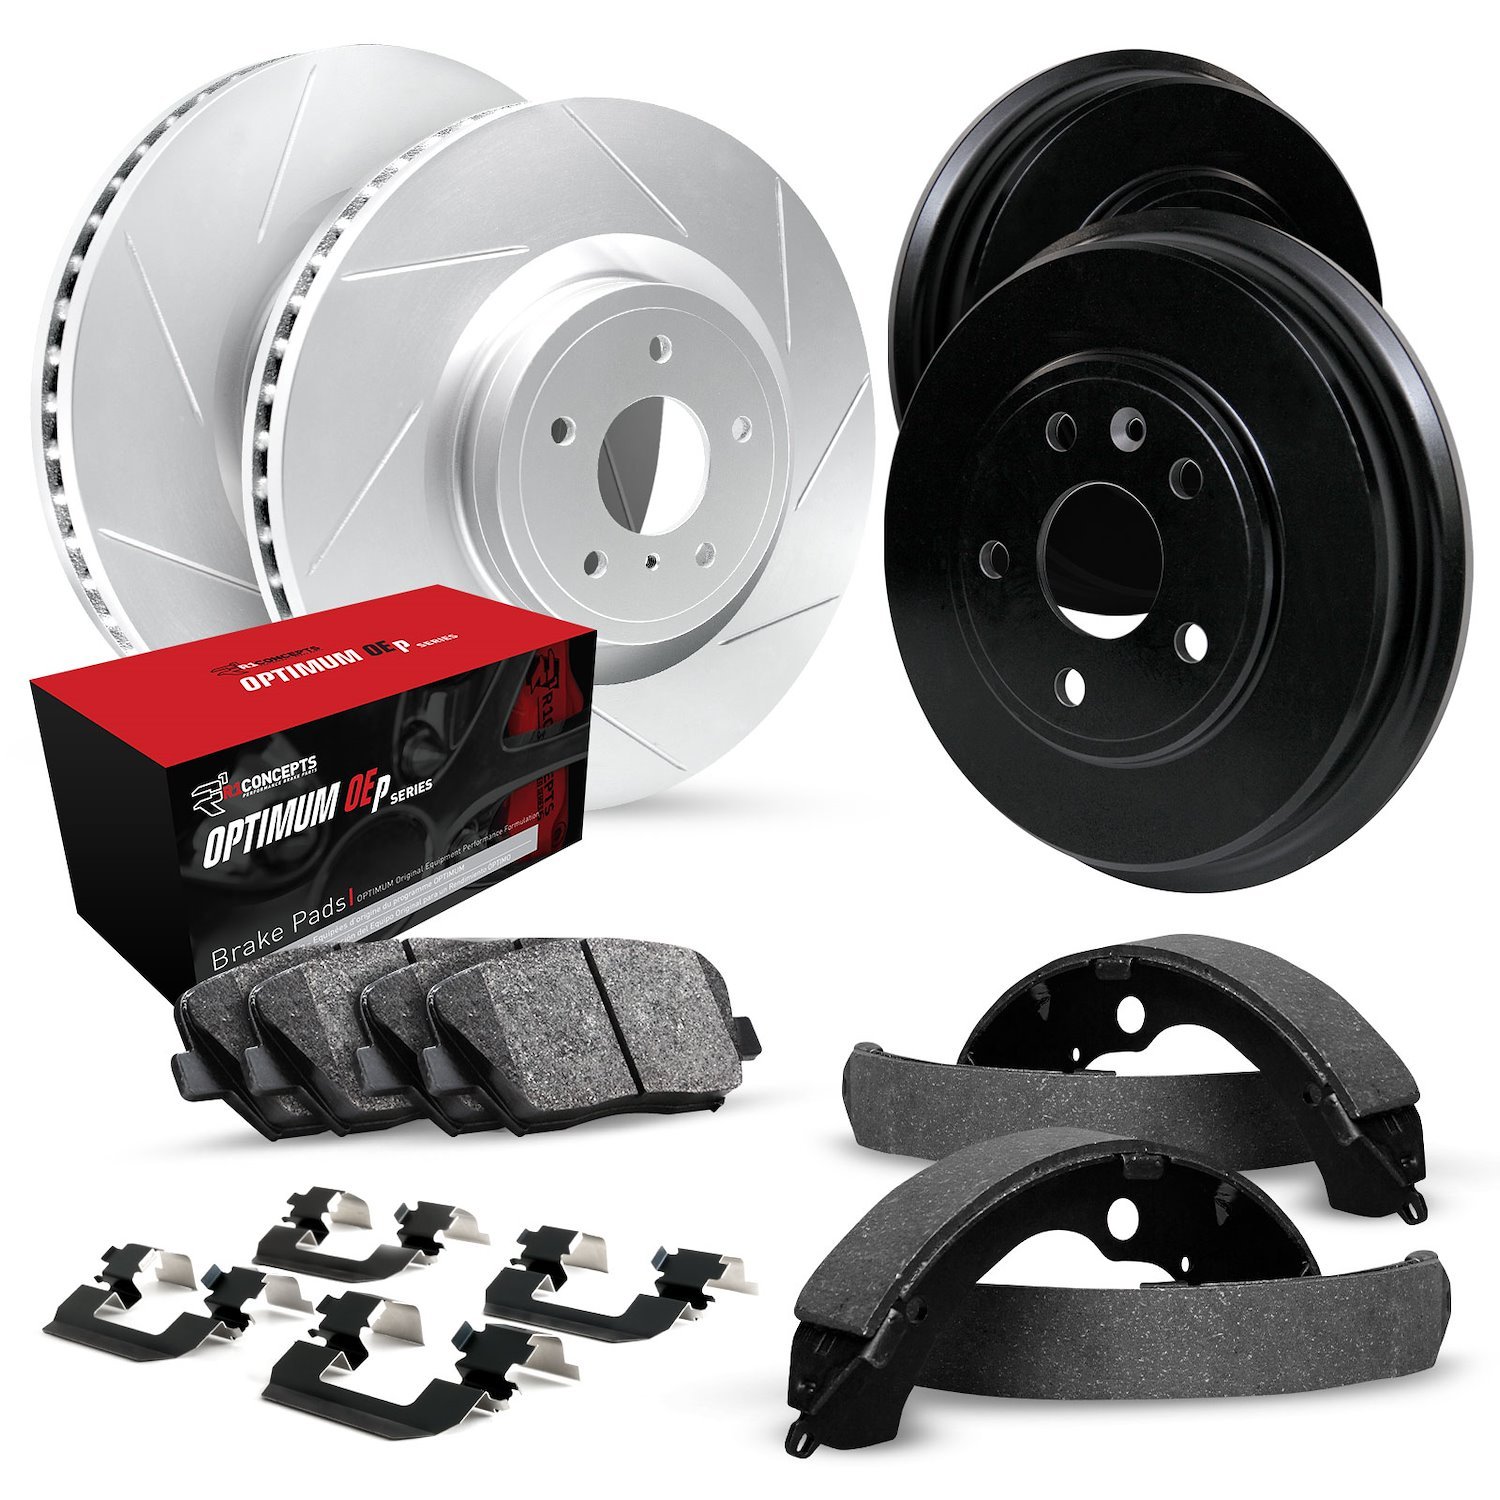 GEO-Carbon Slotted Brake Rotor & Drum Set w/Optimum OE Pads, Shoes, & Hardware, 1981-1991 GM, Position: Front & Rear